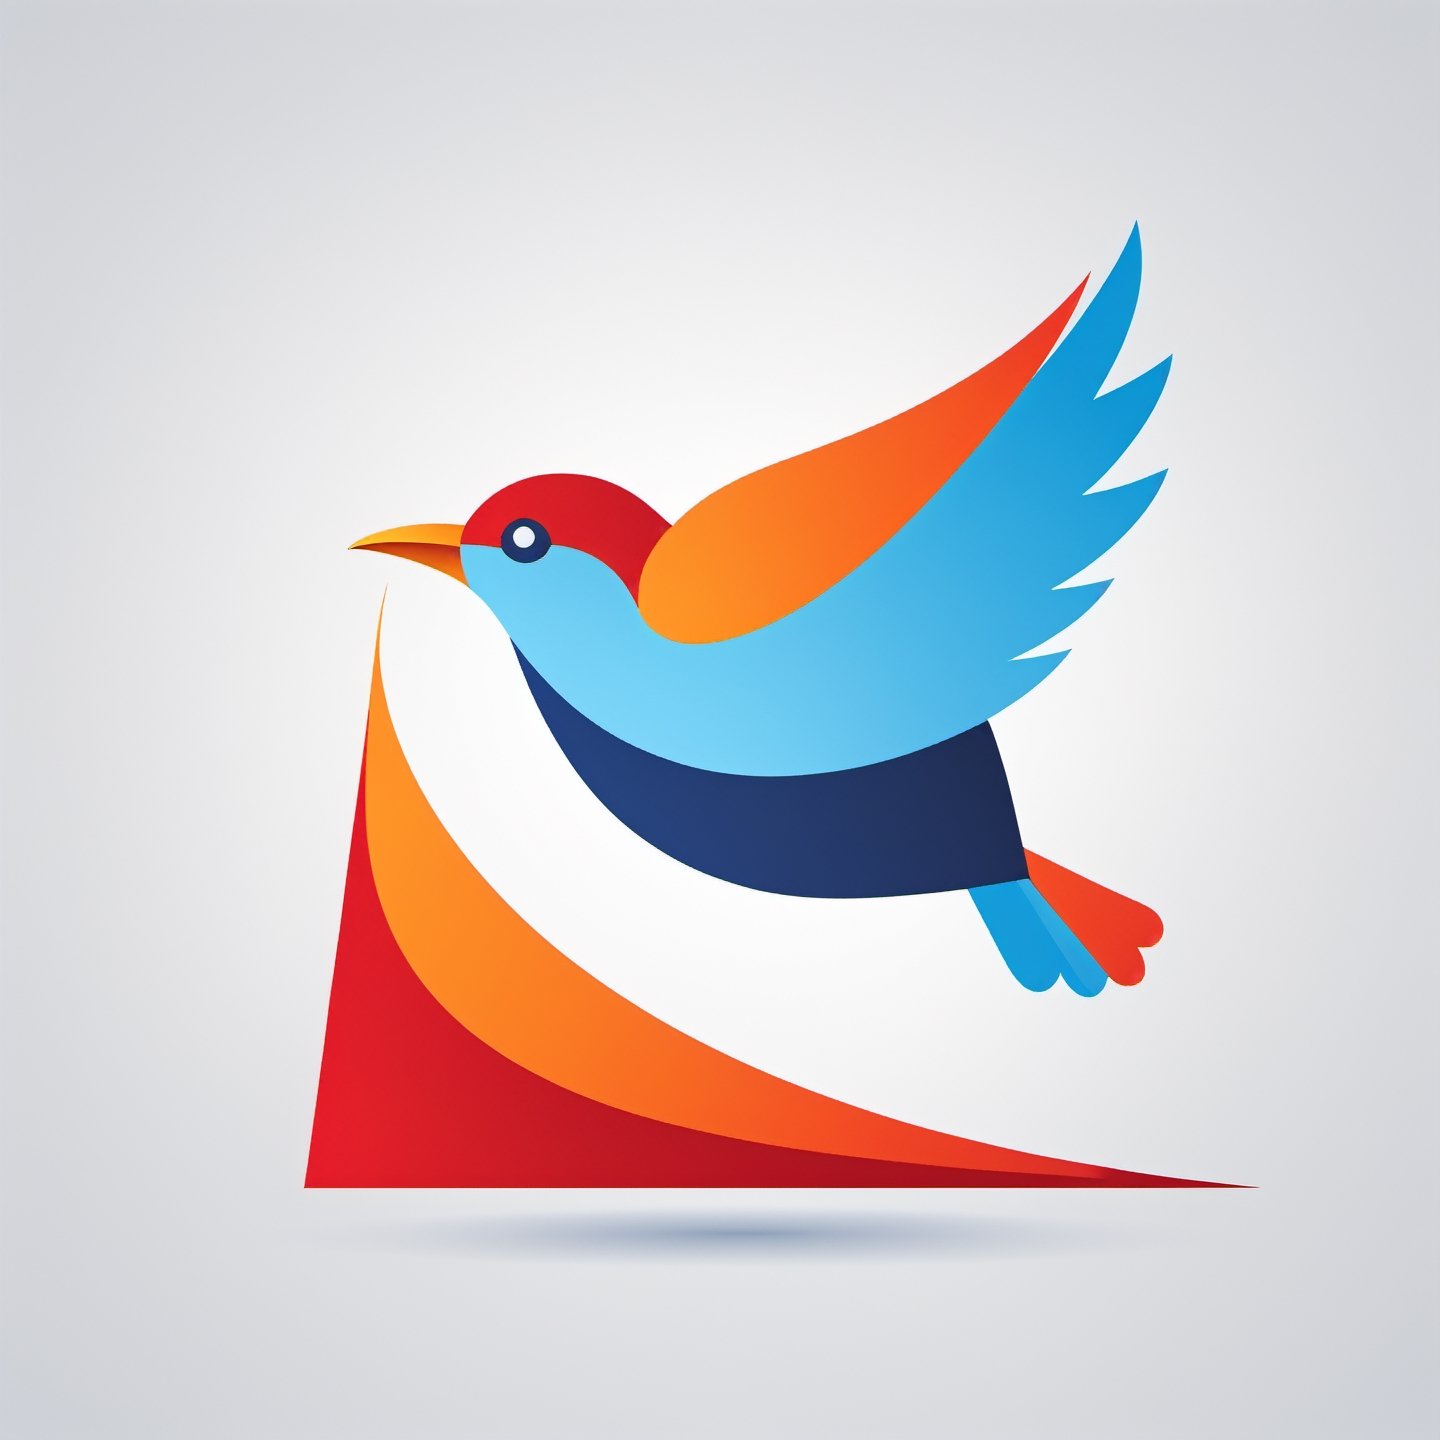 ((vector illustration, flat design)), (((logo bird with open wing, flying from fire:1.3))), ((facing right:1.2)) simple design elements, ((red orange blue palette:1.4)), white background, high quality, ultra-detailed, professional, modern style, eye-catching emblem, creative composition, sharp lines and shapes, stylish and clean, appealing to the eye, striking visual impact, playful and dynamic, crisp and vibrant colors, vivid color scheme, attractive contrast, bold and minimalistic, artistic flair, lively and energetic feel, catchy and memorable design, versatile and scalable graphics, modern and trendy aesthetic, fluid and smooth curves, professional and polished finish, artistic elegance, unique and original concept, vector art illustration